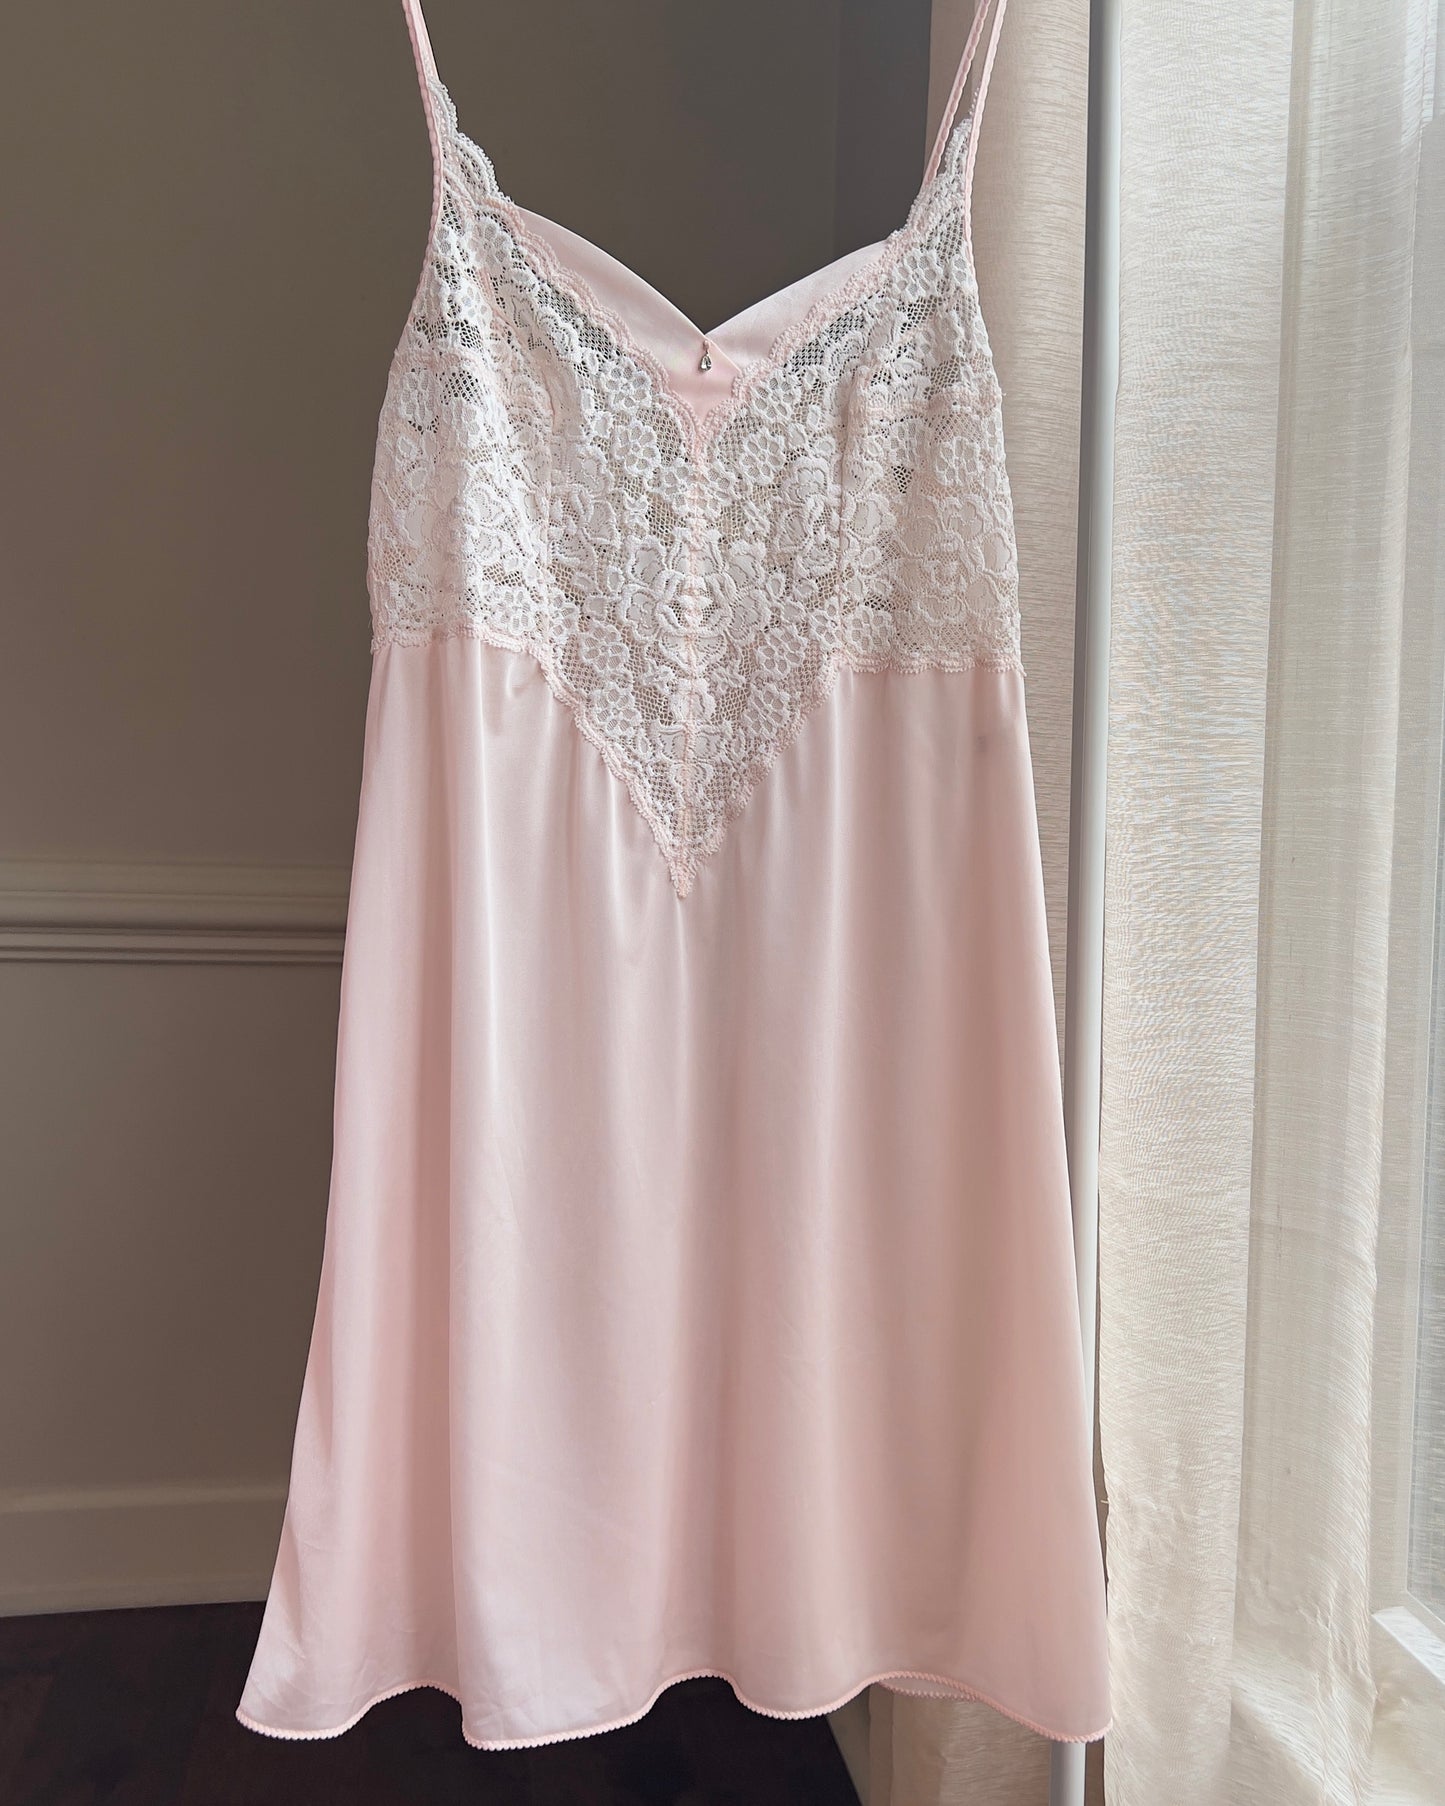 Soft and Feminine Blush Pink Sheer Slip featuring Beautiful Floral Embroidery Bustier